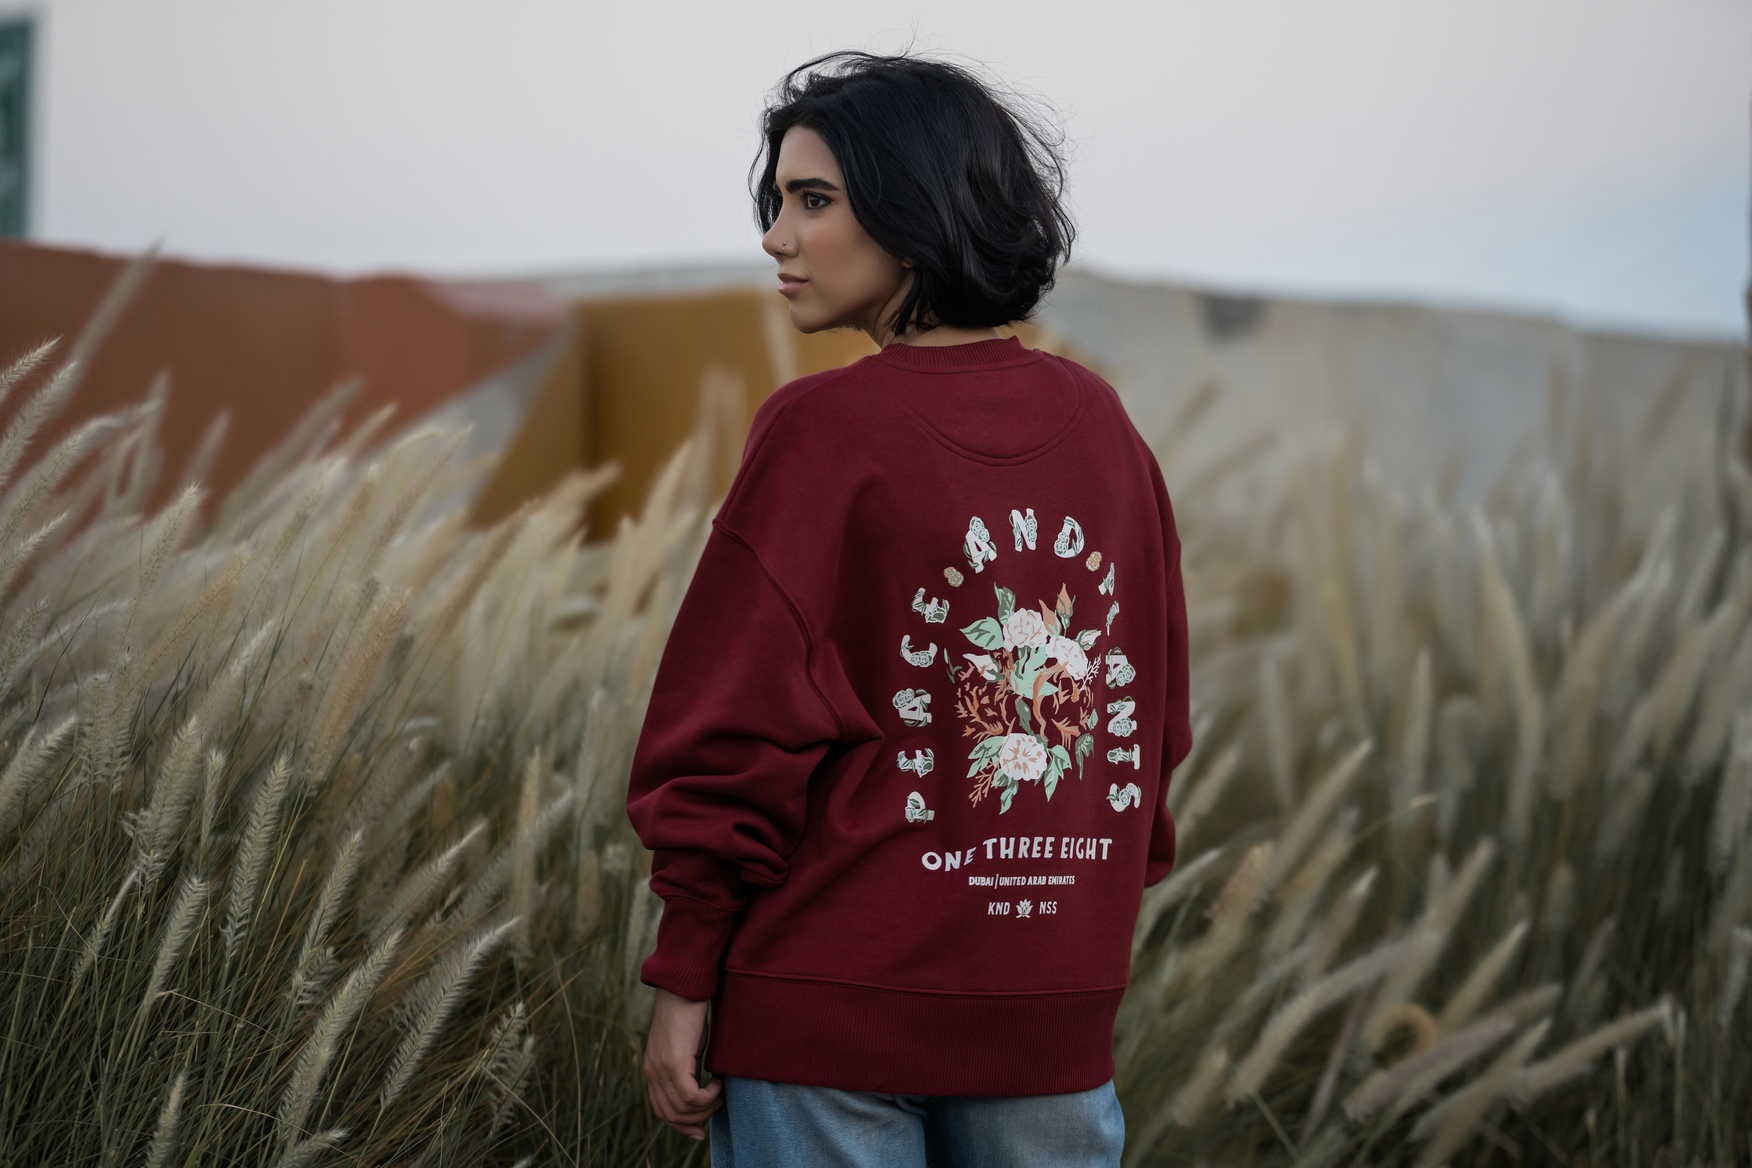 a girl in dubai wearing the environmentally friendly peace and plants oversized shirt from the 138 way